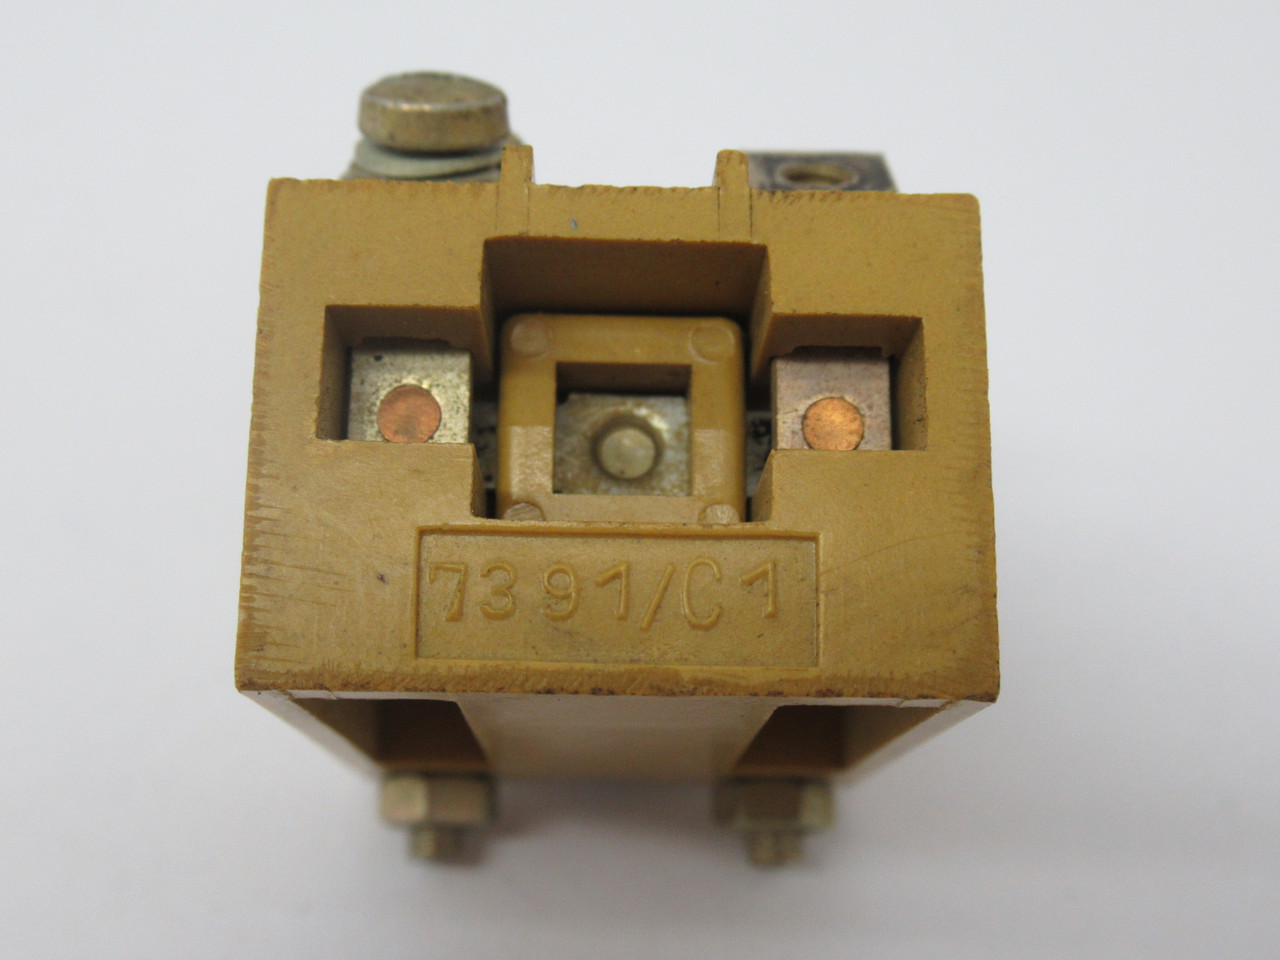 Sontheimer 7391/C1 Brown Contact Block 2NO 6A@500VAC *Missing Screws* USED